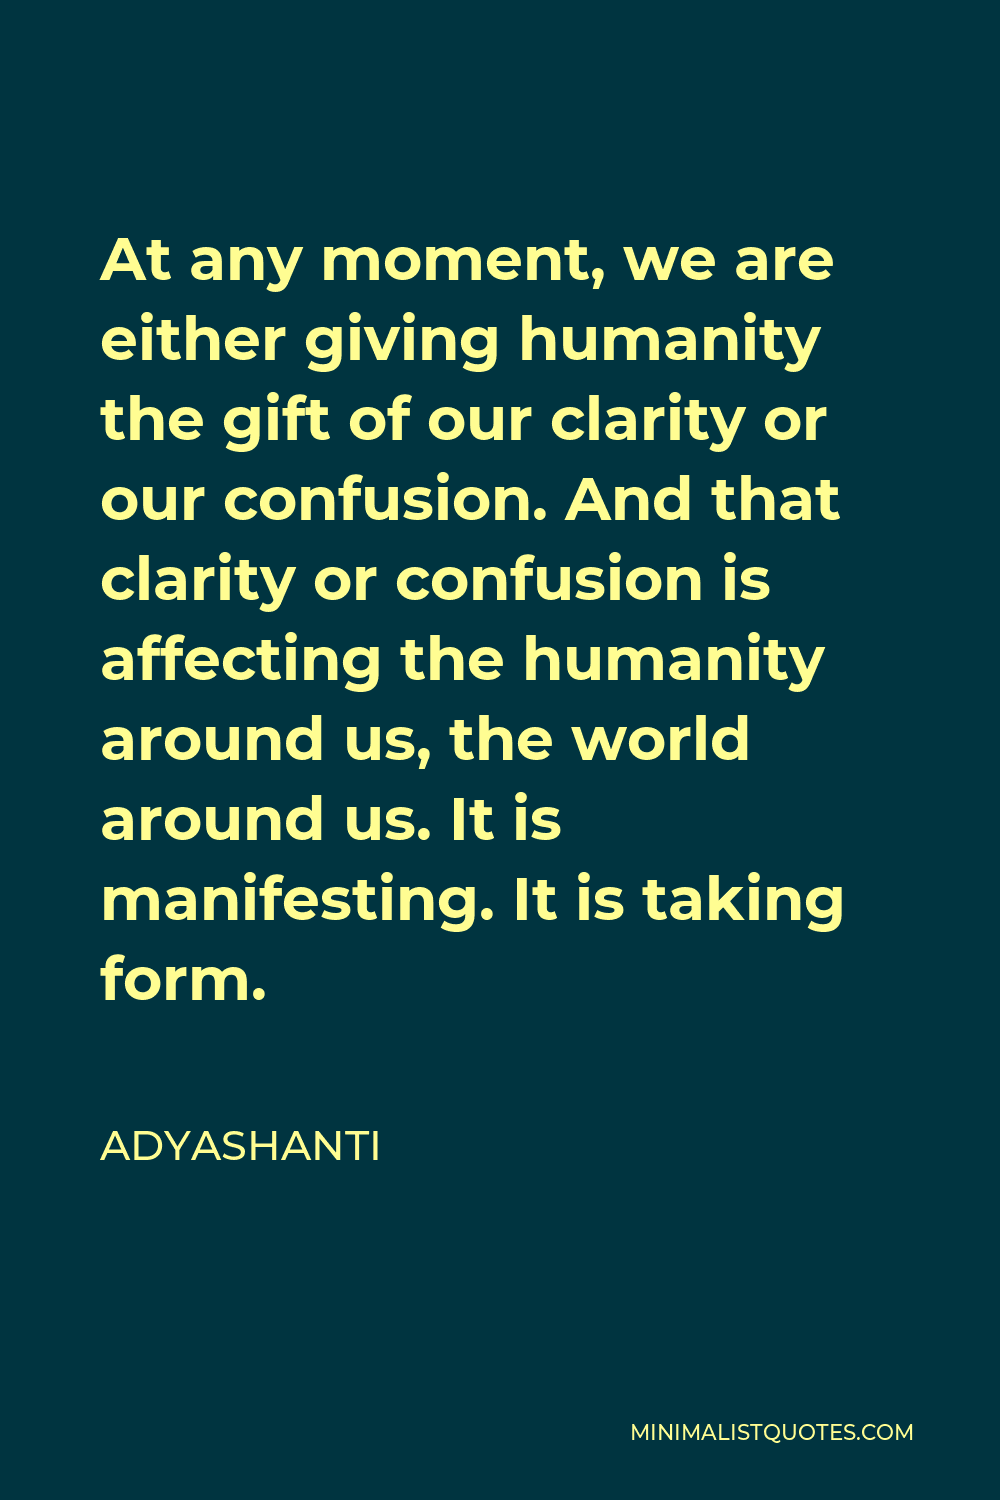 Adyashanti Quote - At any moment, we are either giving humanity the gift of our clarity or our confusion. And that clarity or confusion is affecting the humanity around us, the world around us. It is manifesting. It is taking form.